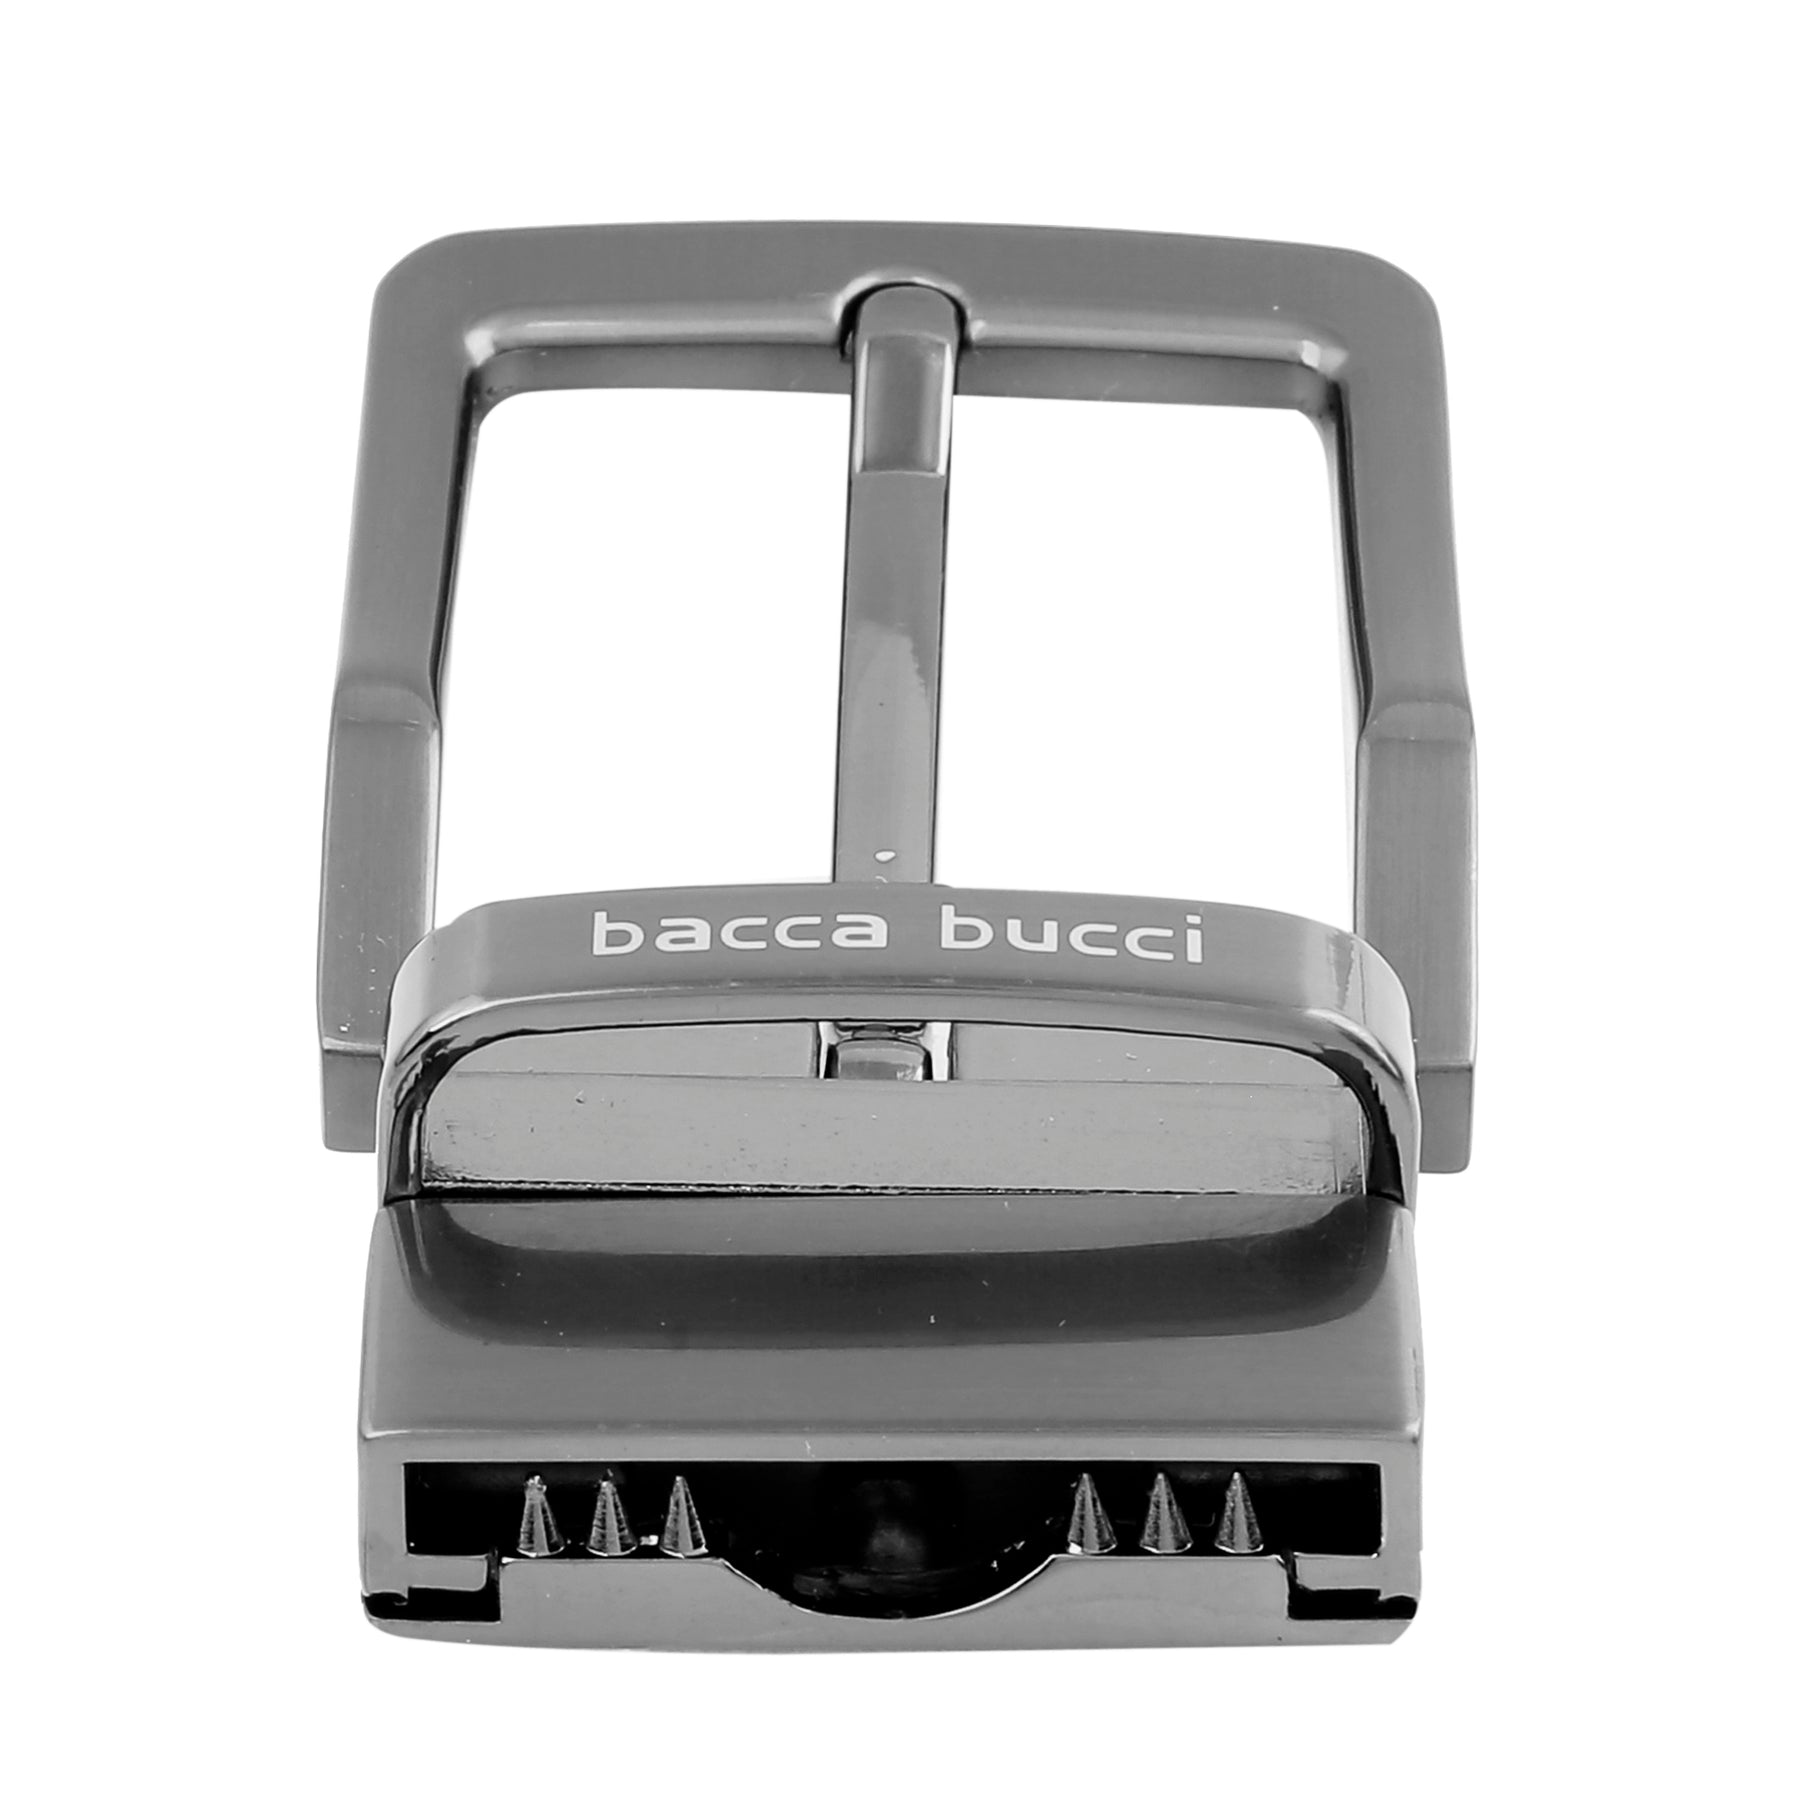 Bacca Bucci 35MM Nickle Free Reversible-Clamp Belt Buckle with Branding (Buckle only)